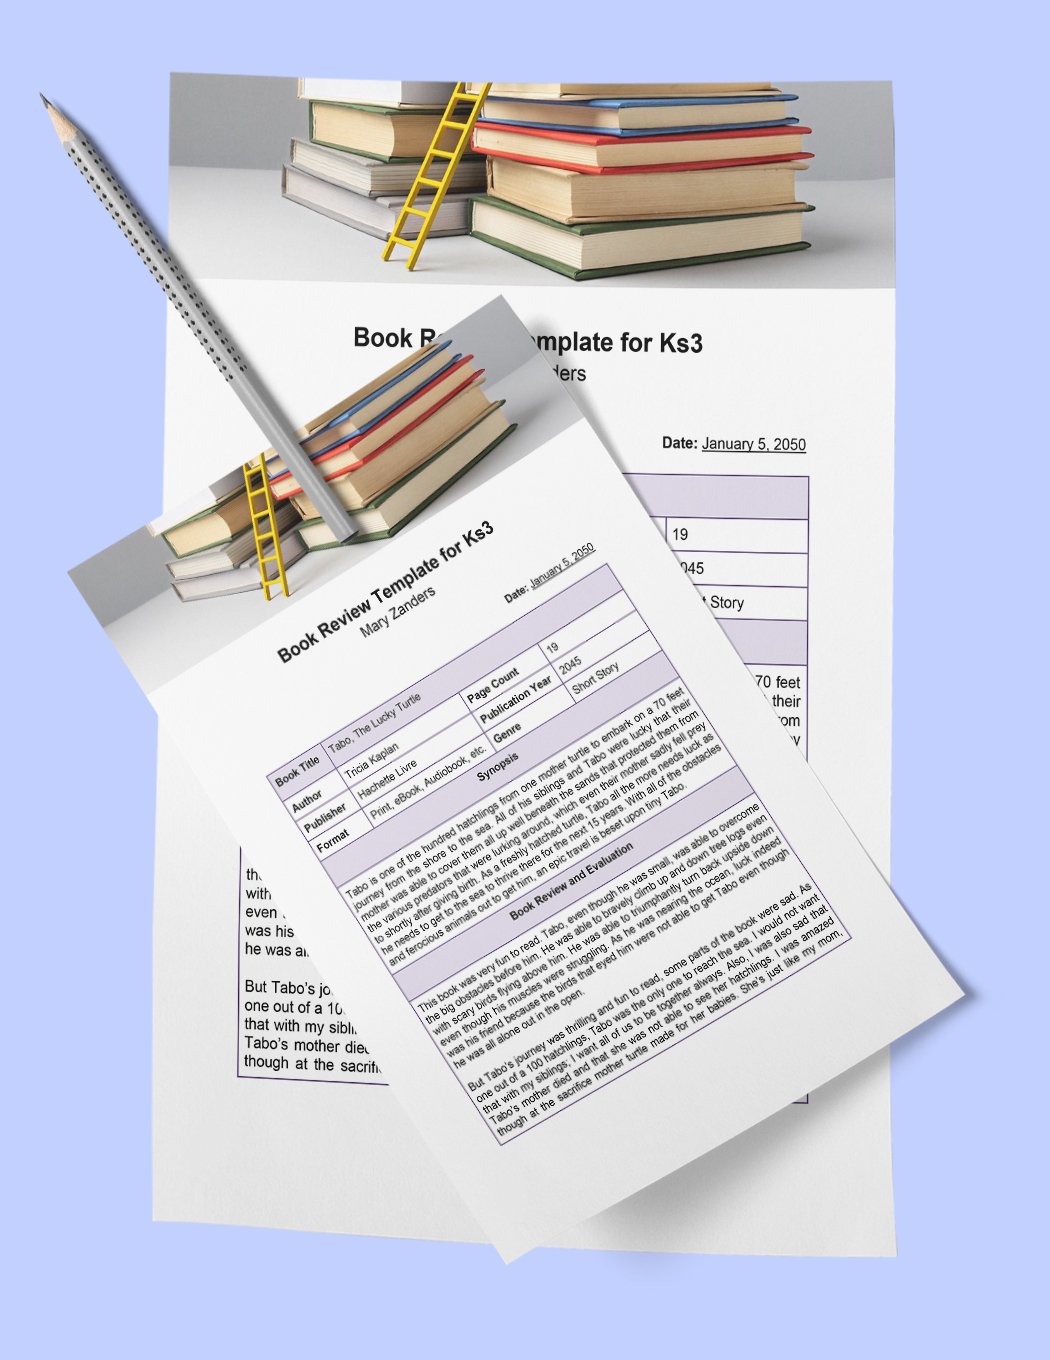 Book Review Template Ks3 in Word, Google Docs